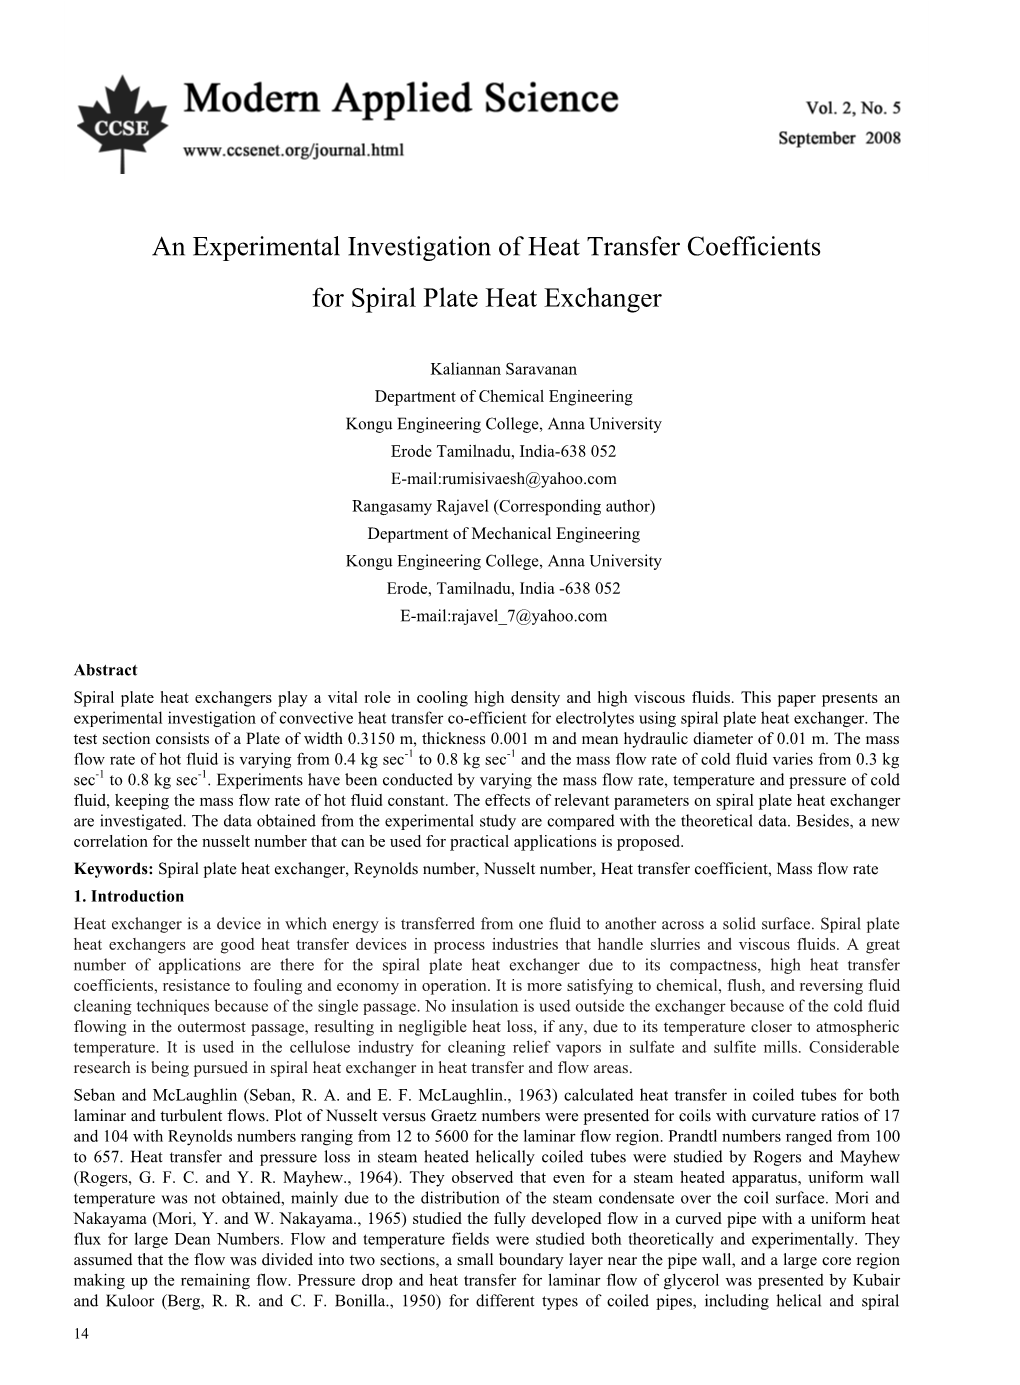 An Experimental Investigation of Heat Transfer Coefficients for Spiral Plate Heat Exchanger